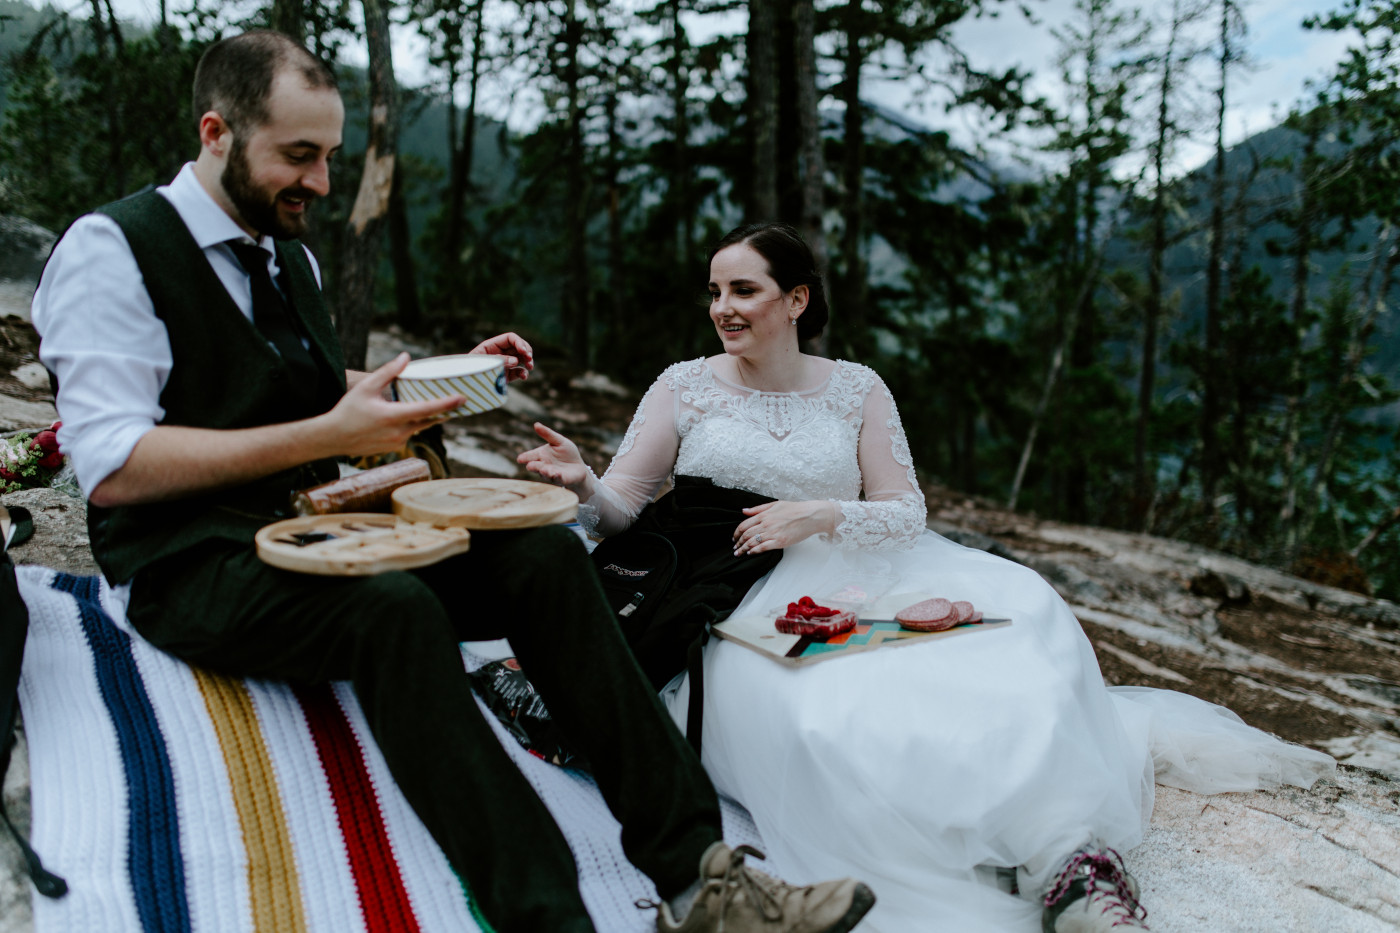 Elizabeth and Alex have their wedding day picnic. Elopement photography at North Cascades National Park by Sienna Plus Josh.